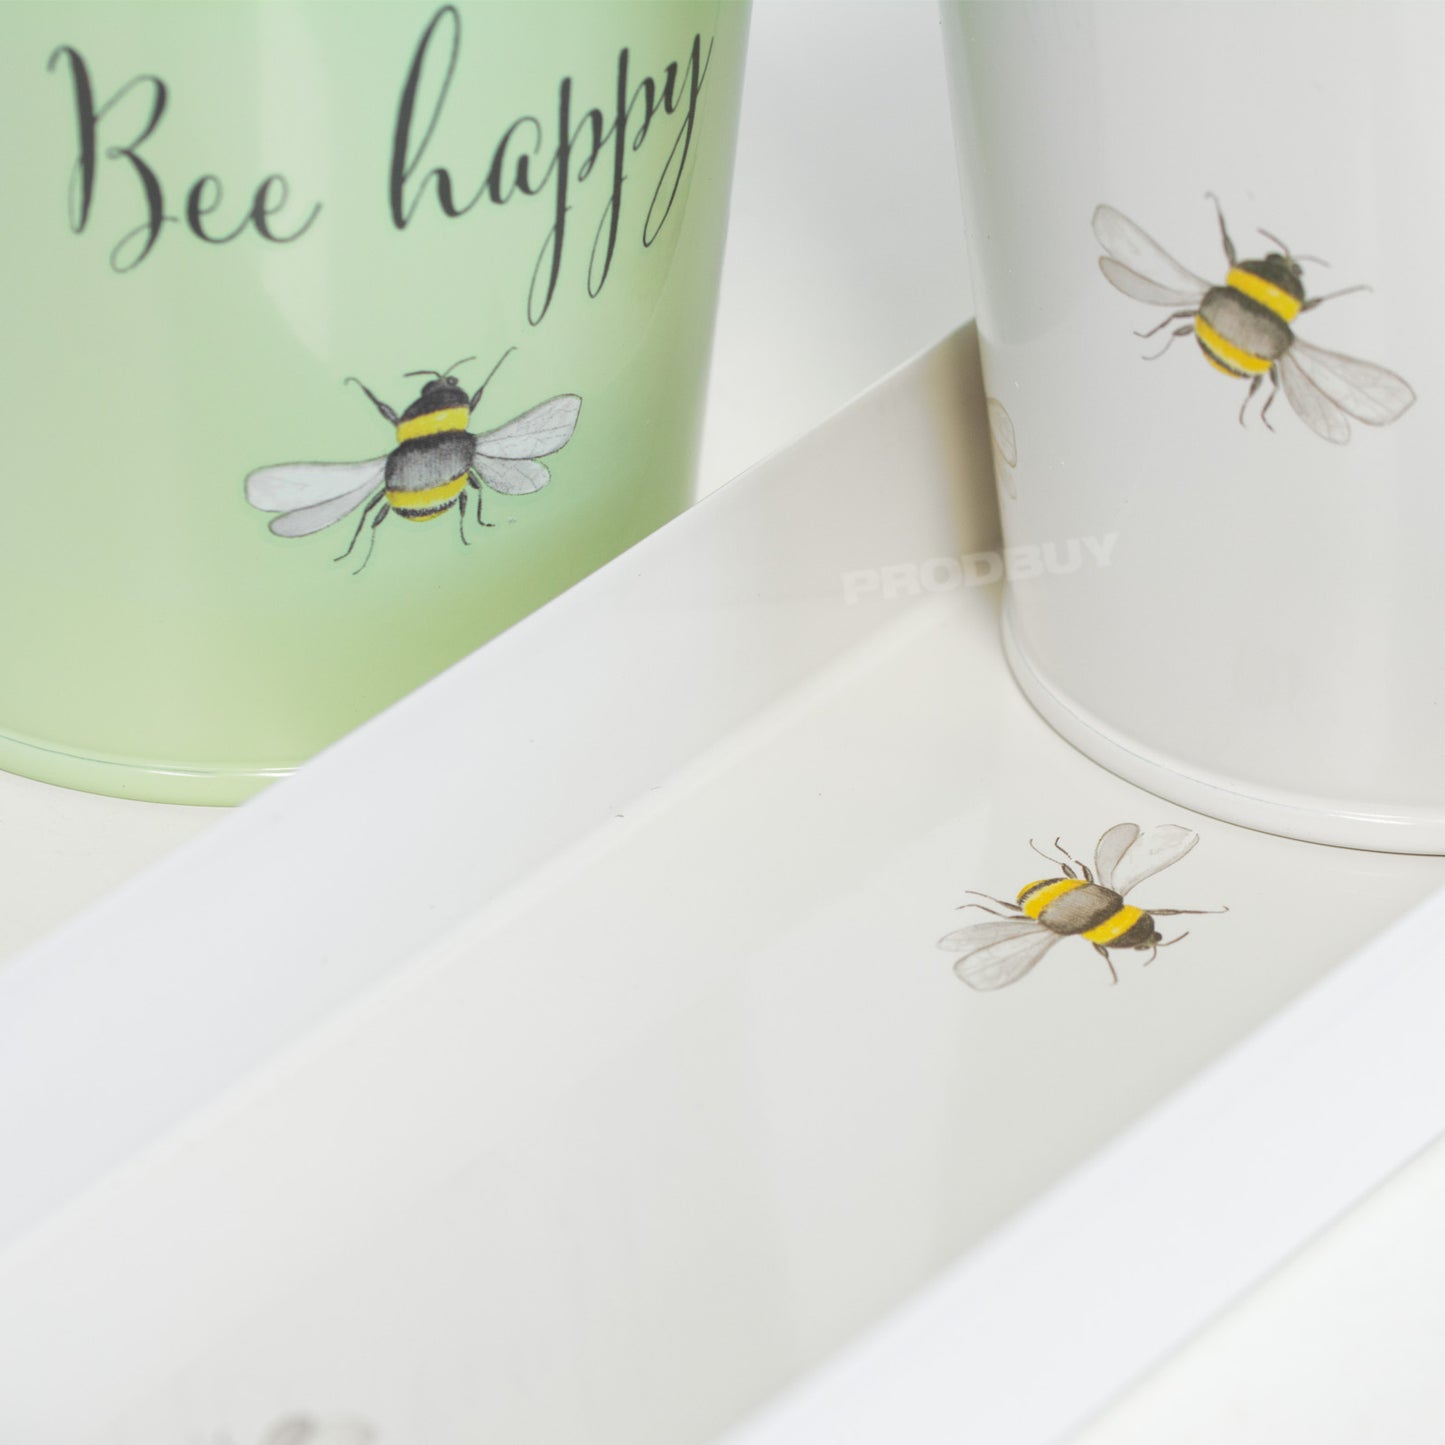 Set of 3 'Bee Happy' Metal Plant Pots on Tray